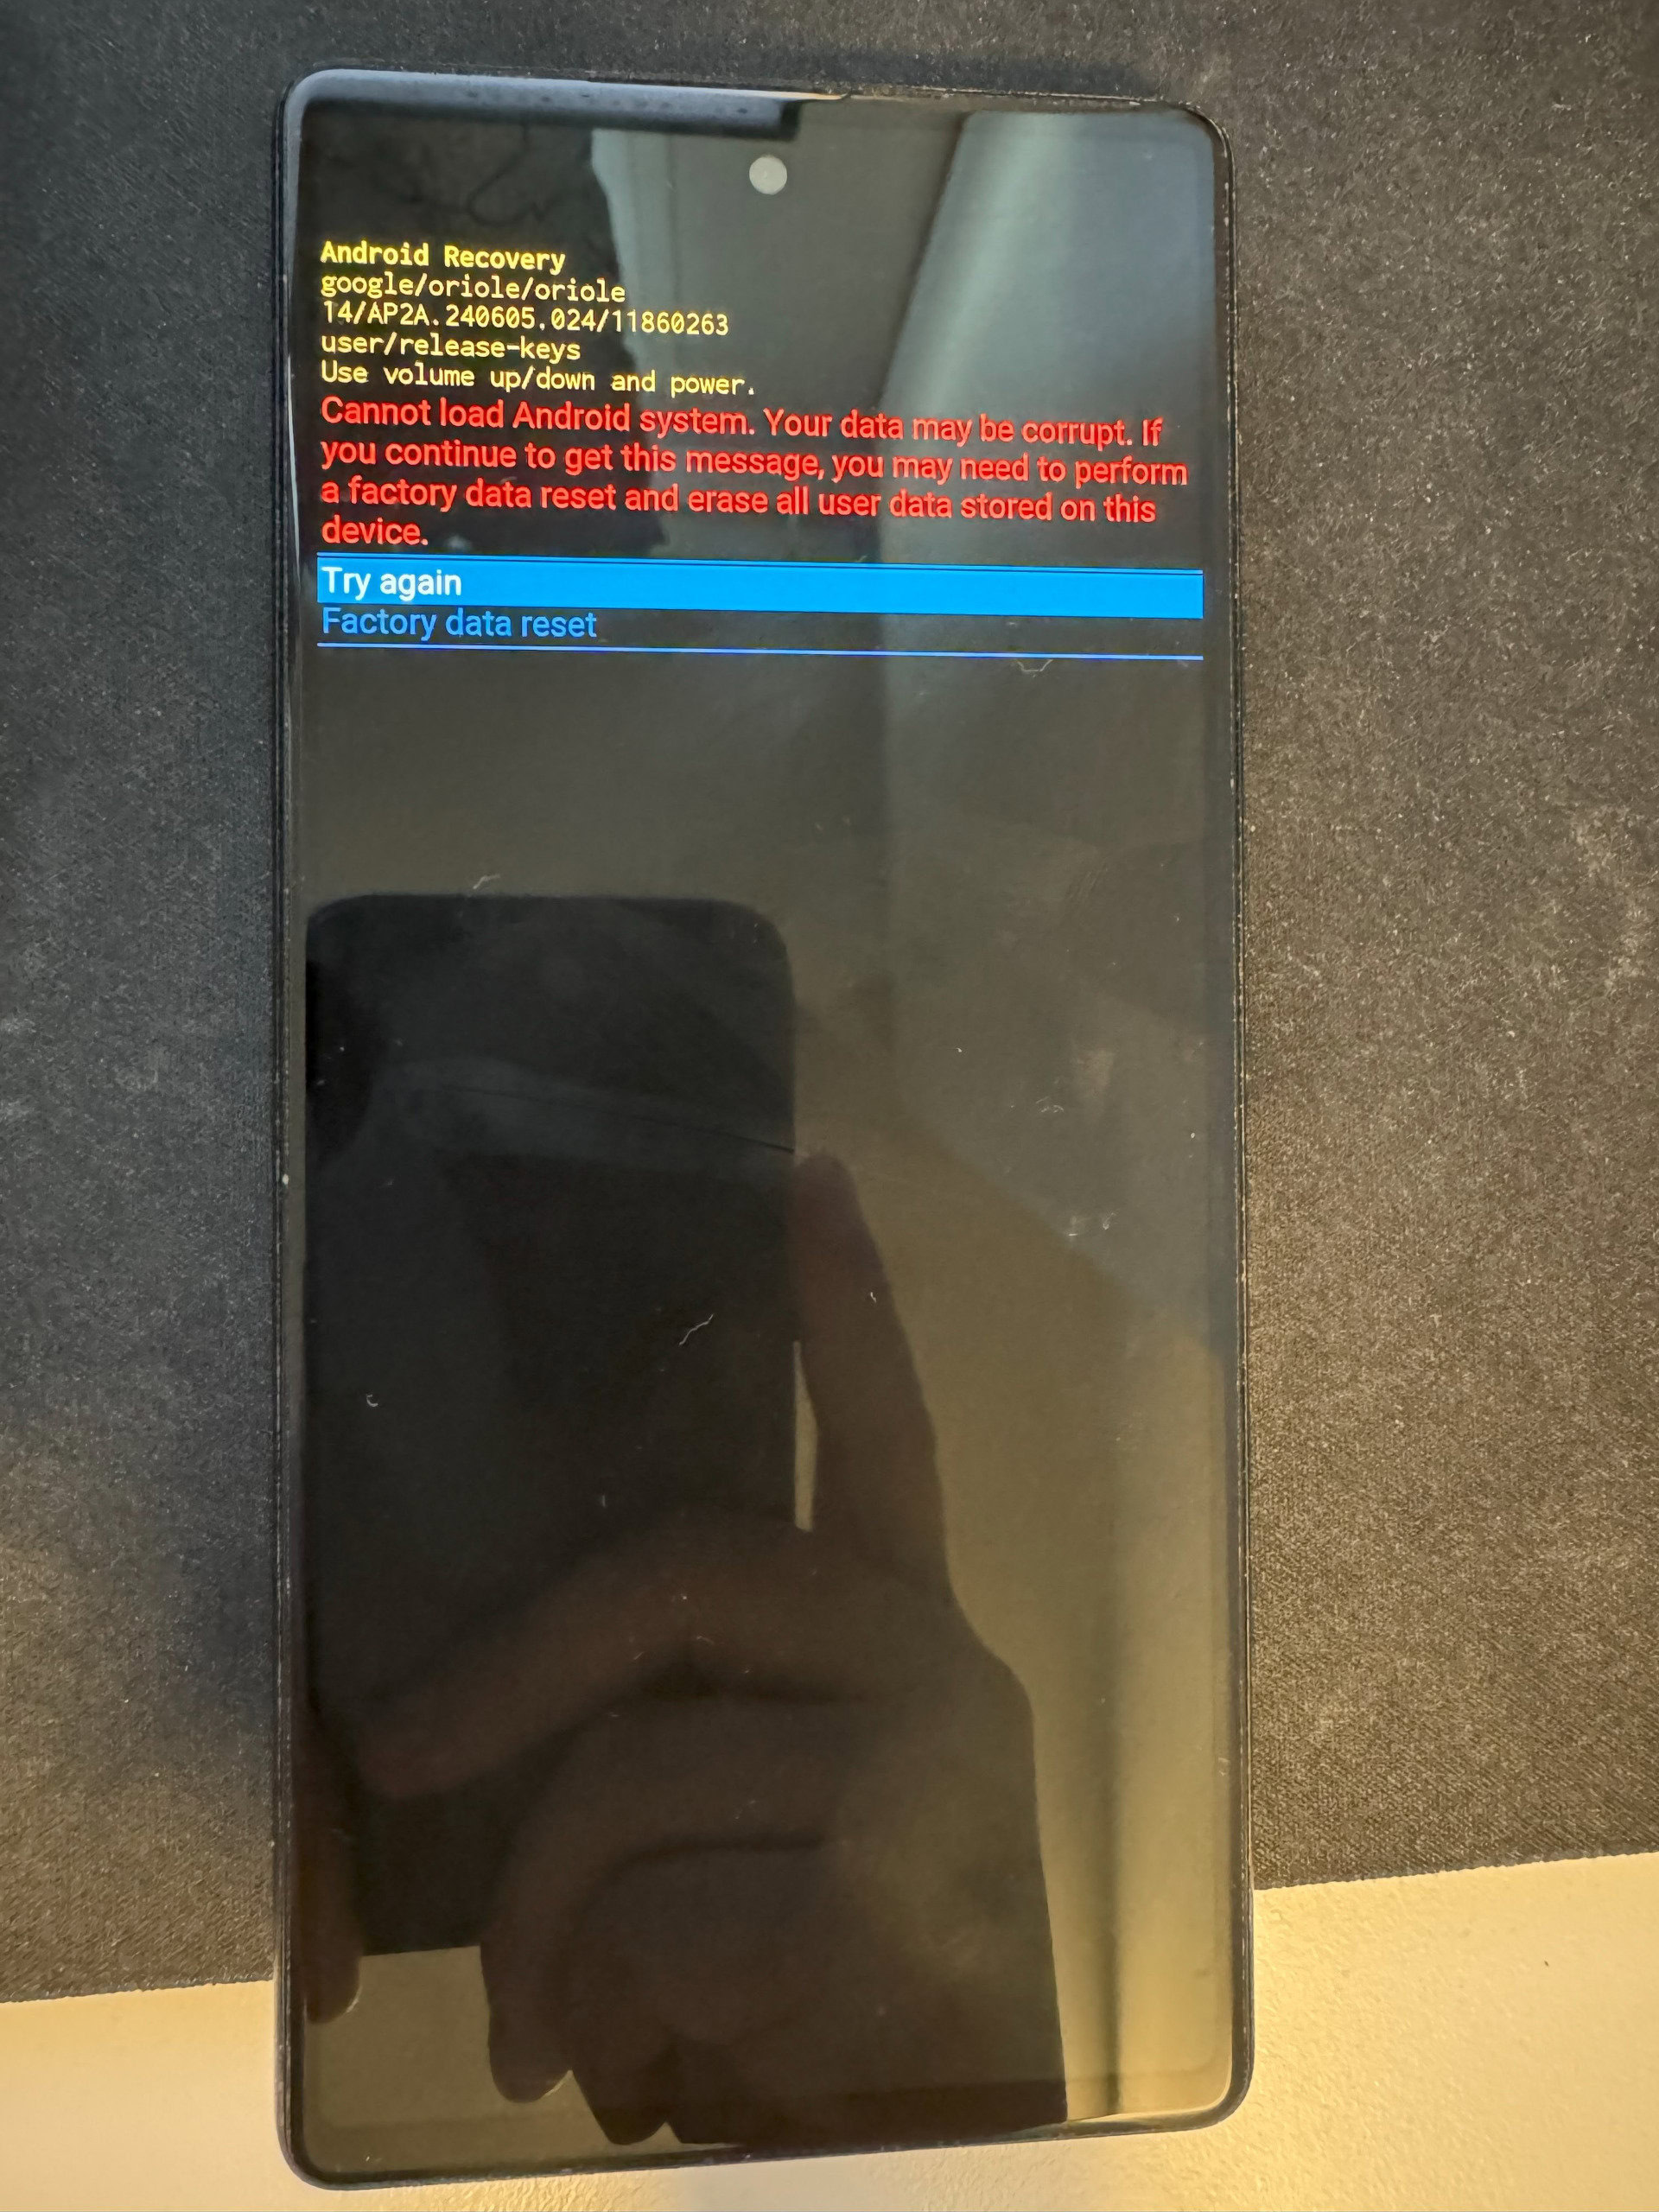 An image showing a bricked Google Pixel 6 with an error message on the screen.